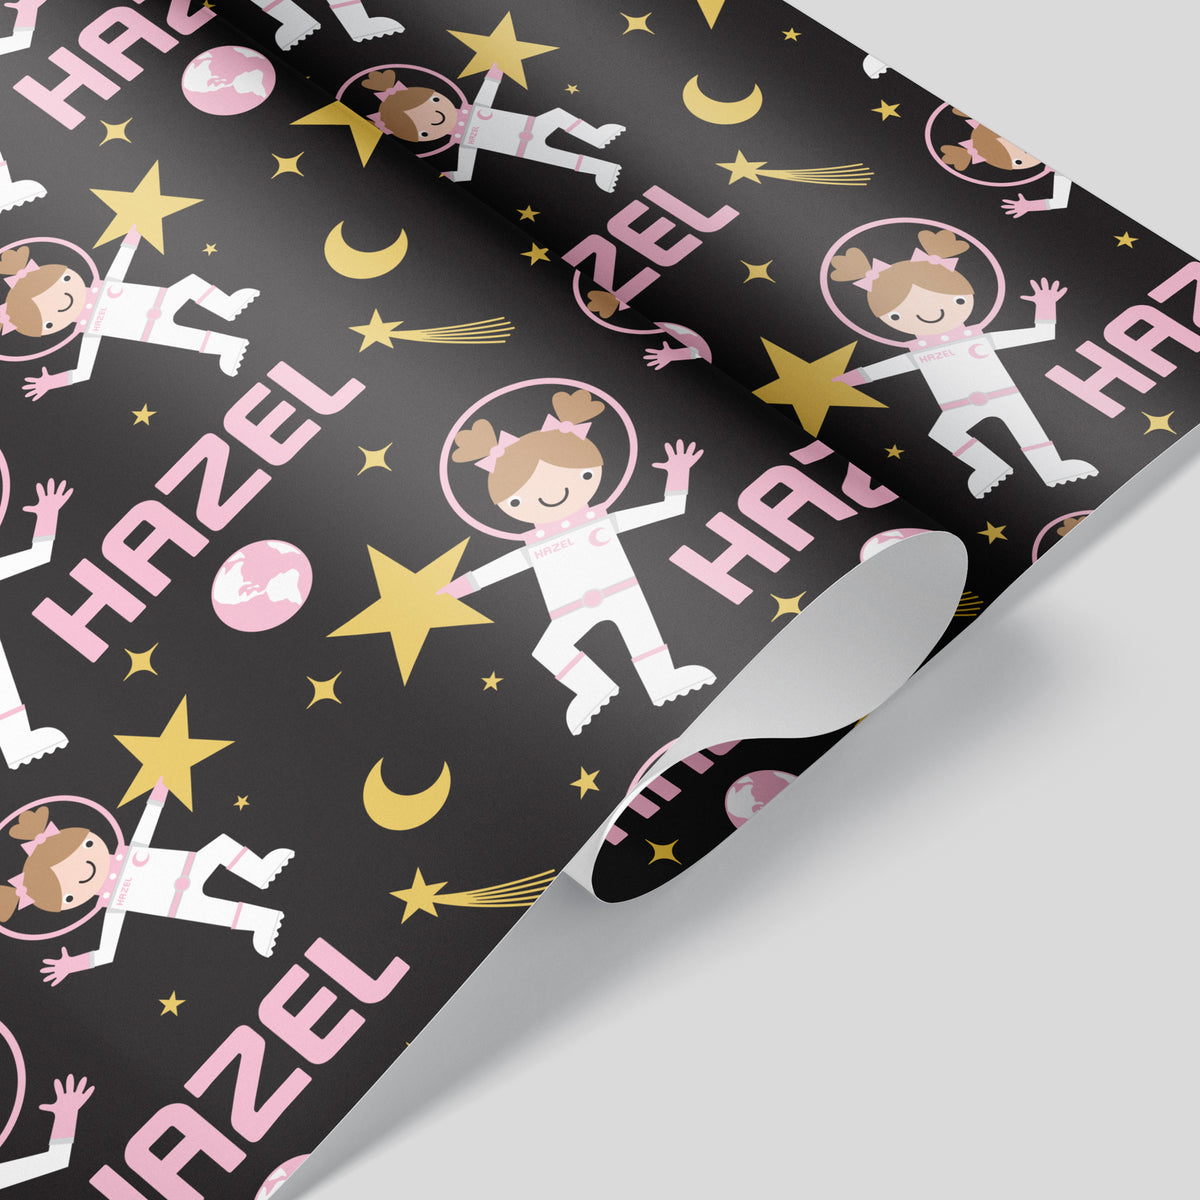 Astronaut Girl Personalized Wrapping Paper - PINK